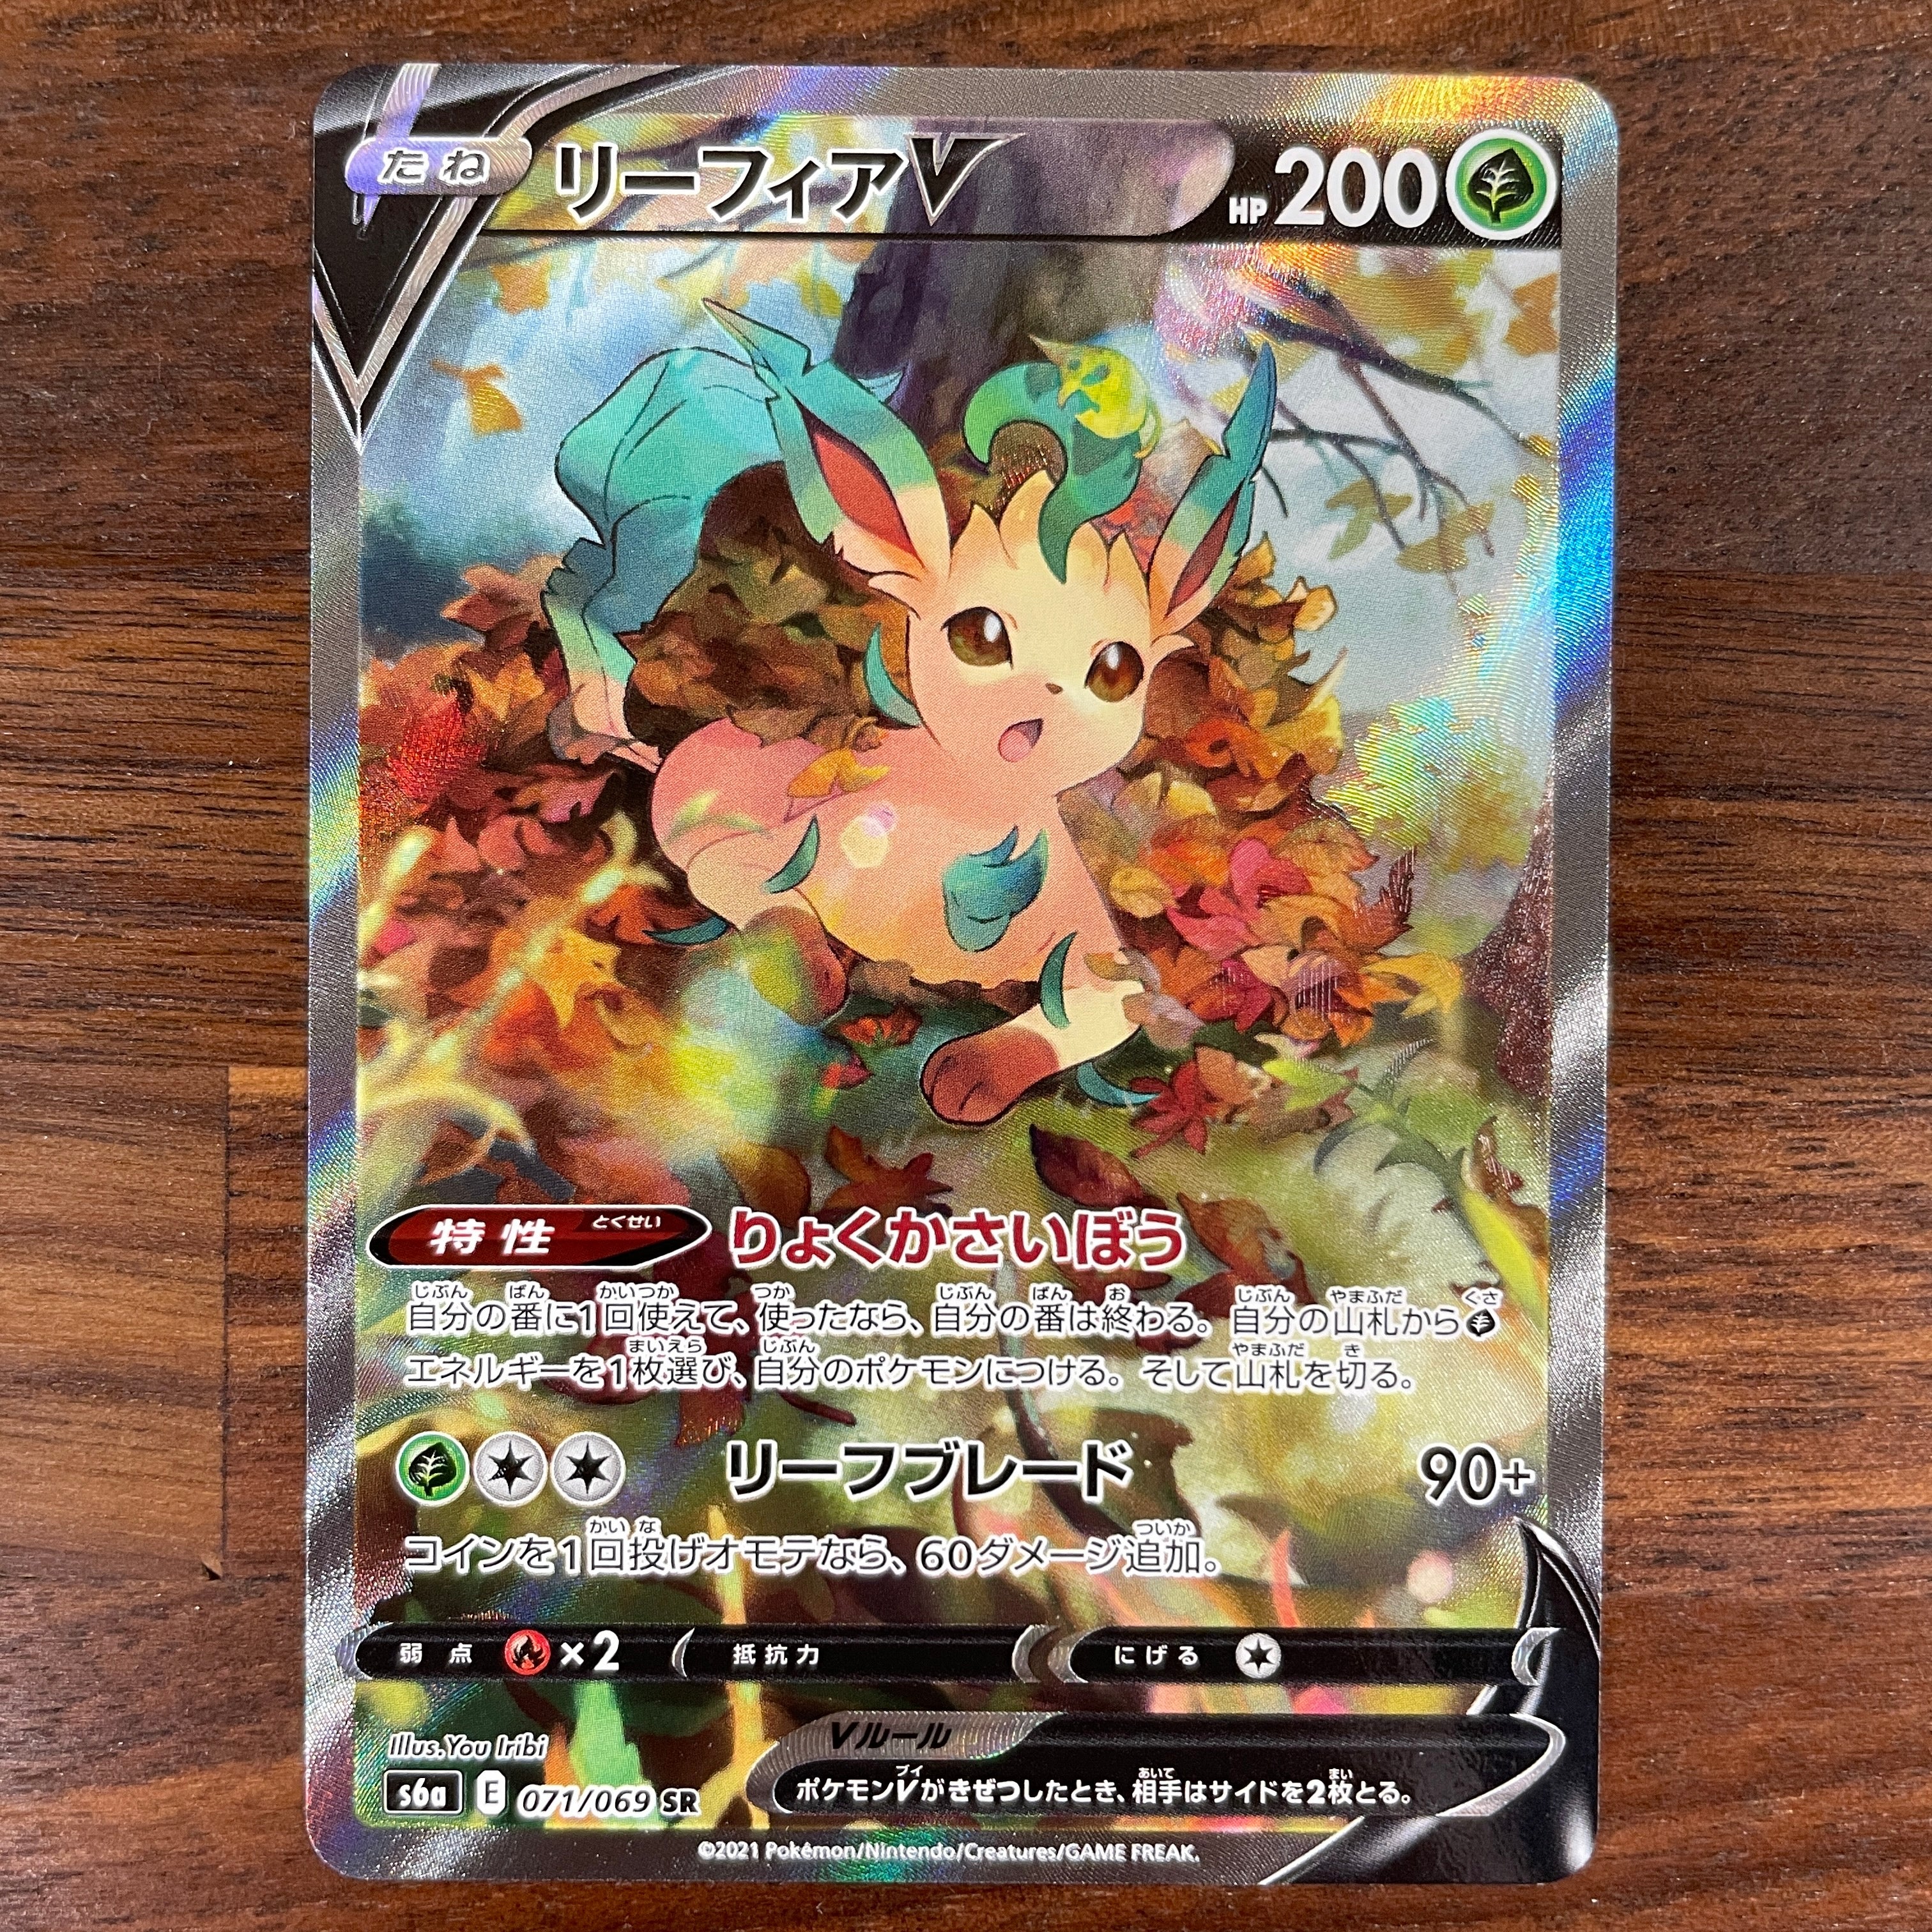 POKÉMON CARD GAME Sword & Shield Expansion pack ｢Eevee Heroes｣  POKÉMON CARD GAME s6a 071/069 Super Rare card  Leafeon V